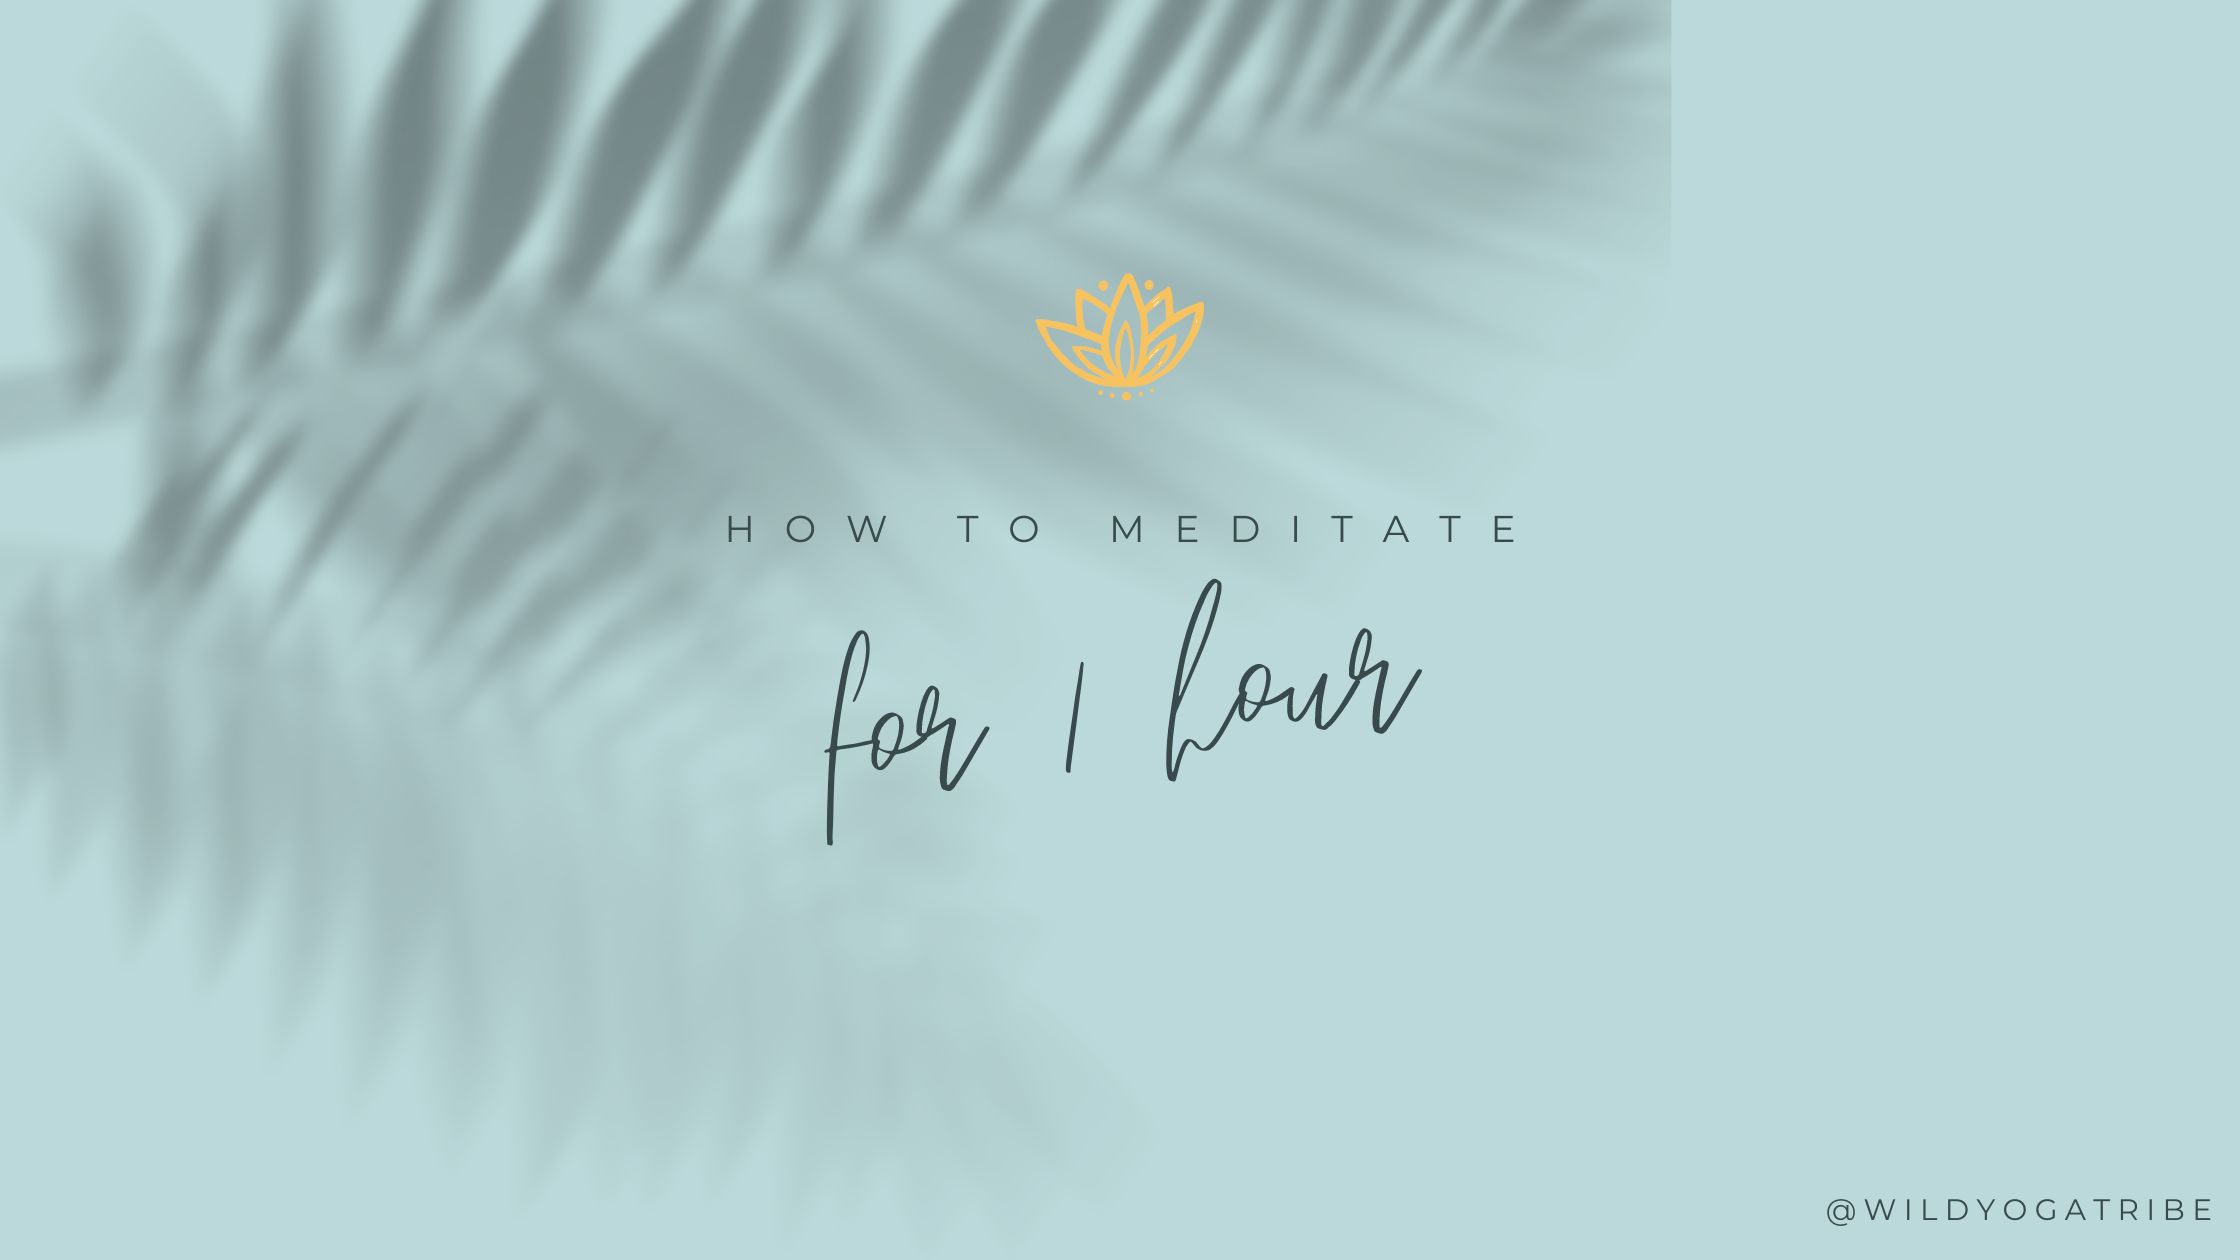 Step By Step Guide for Meditating for 1-hour